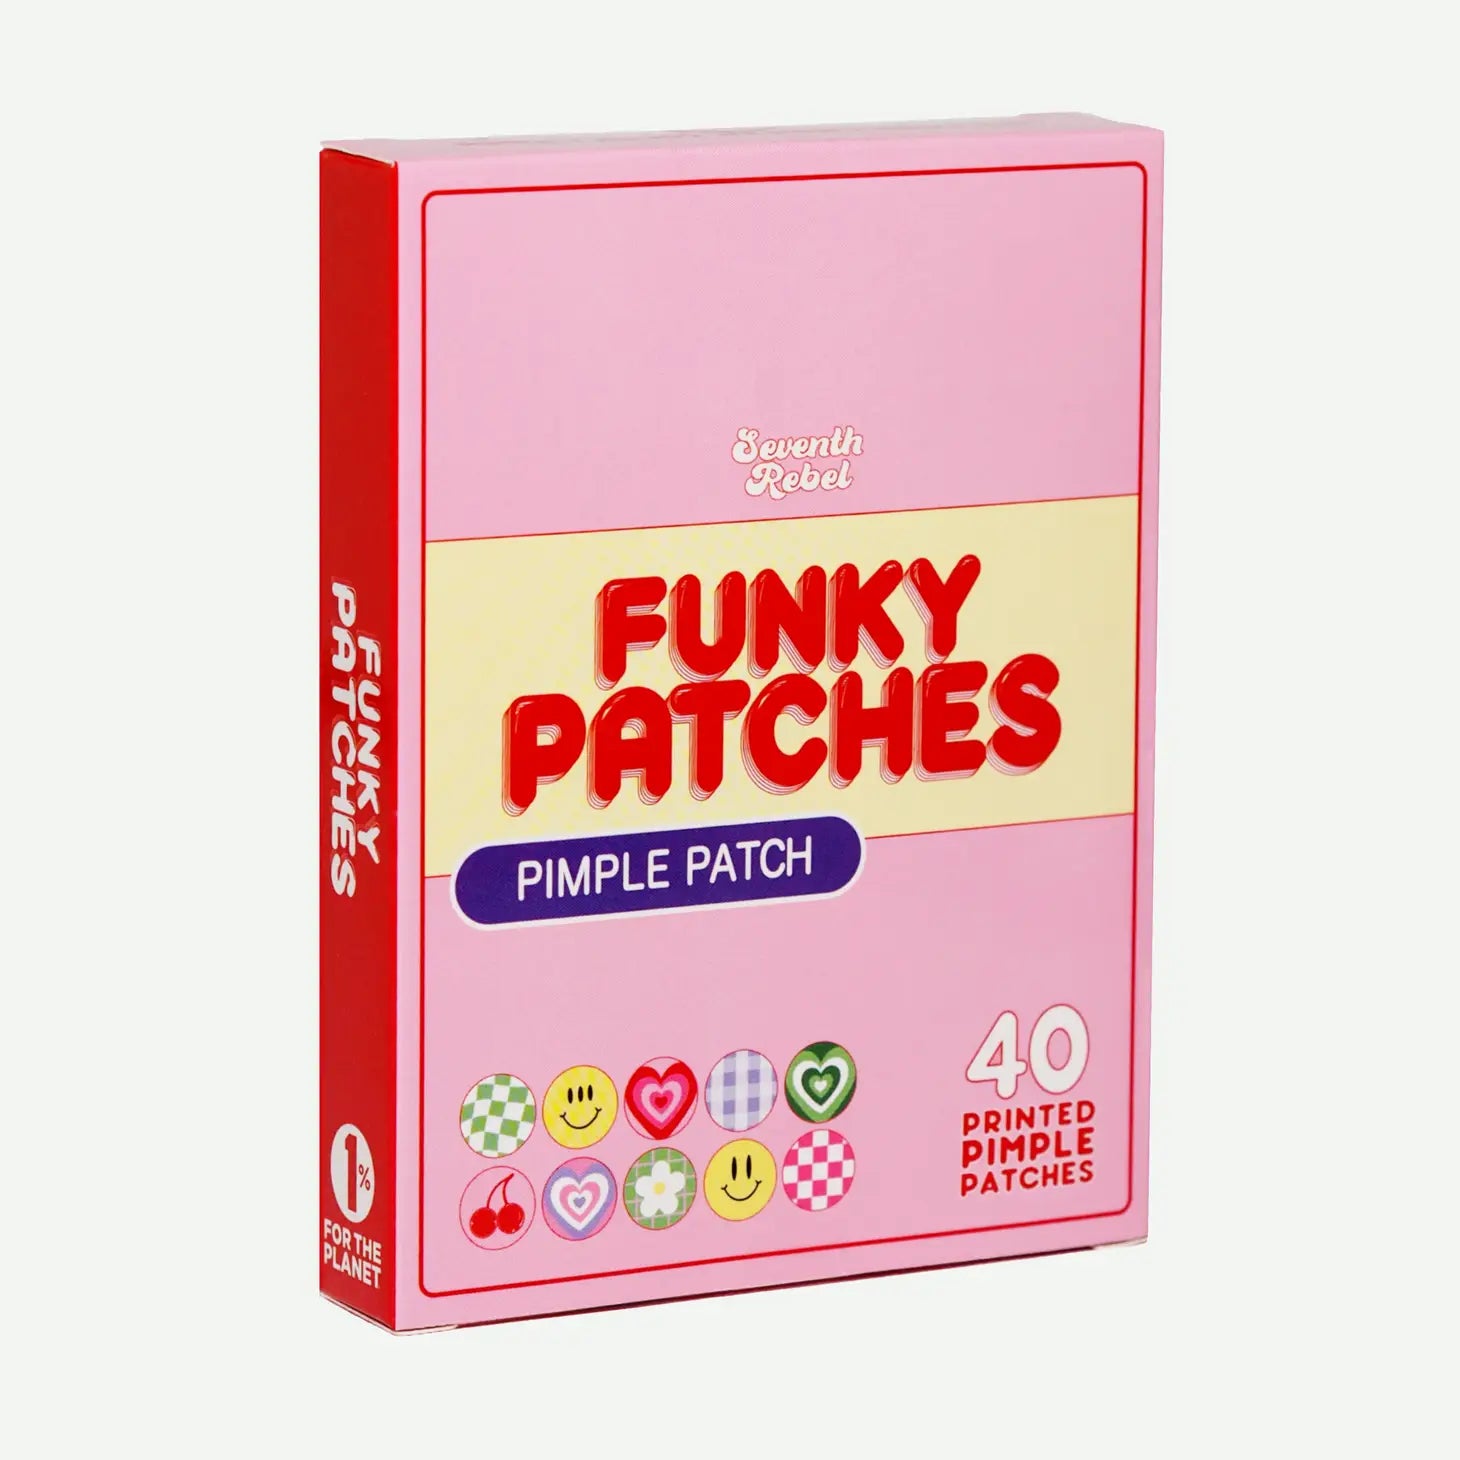 Funky Patches Pimple Patch